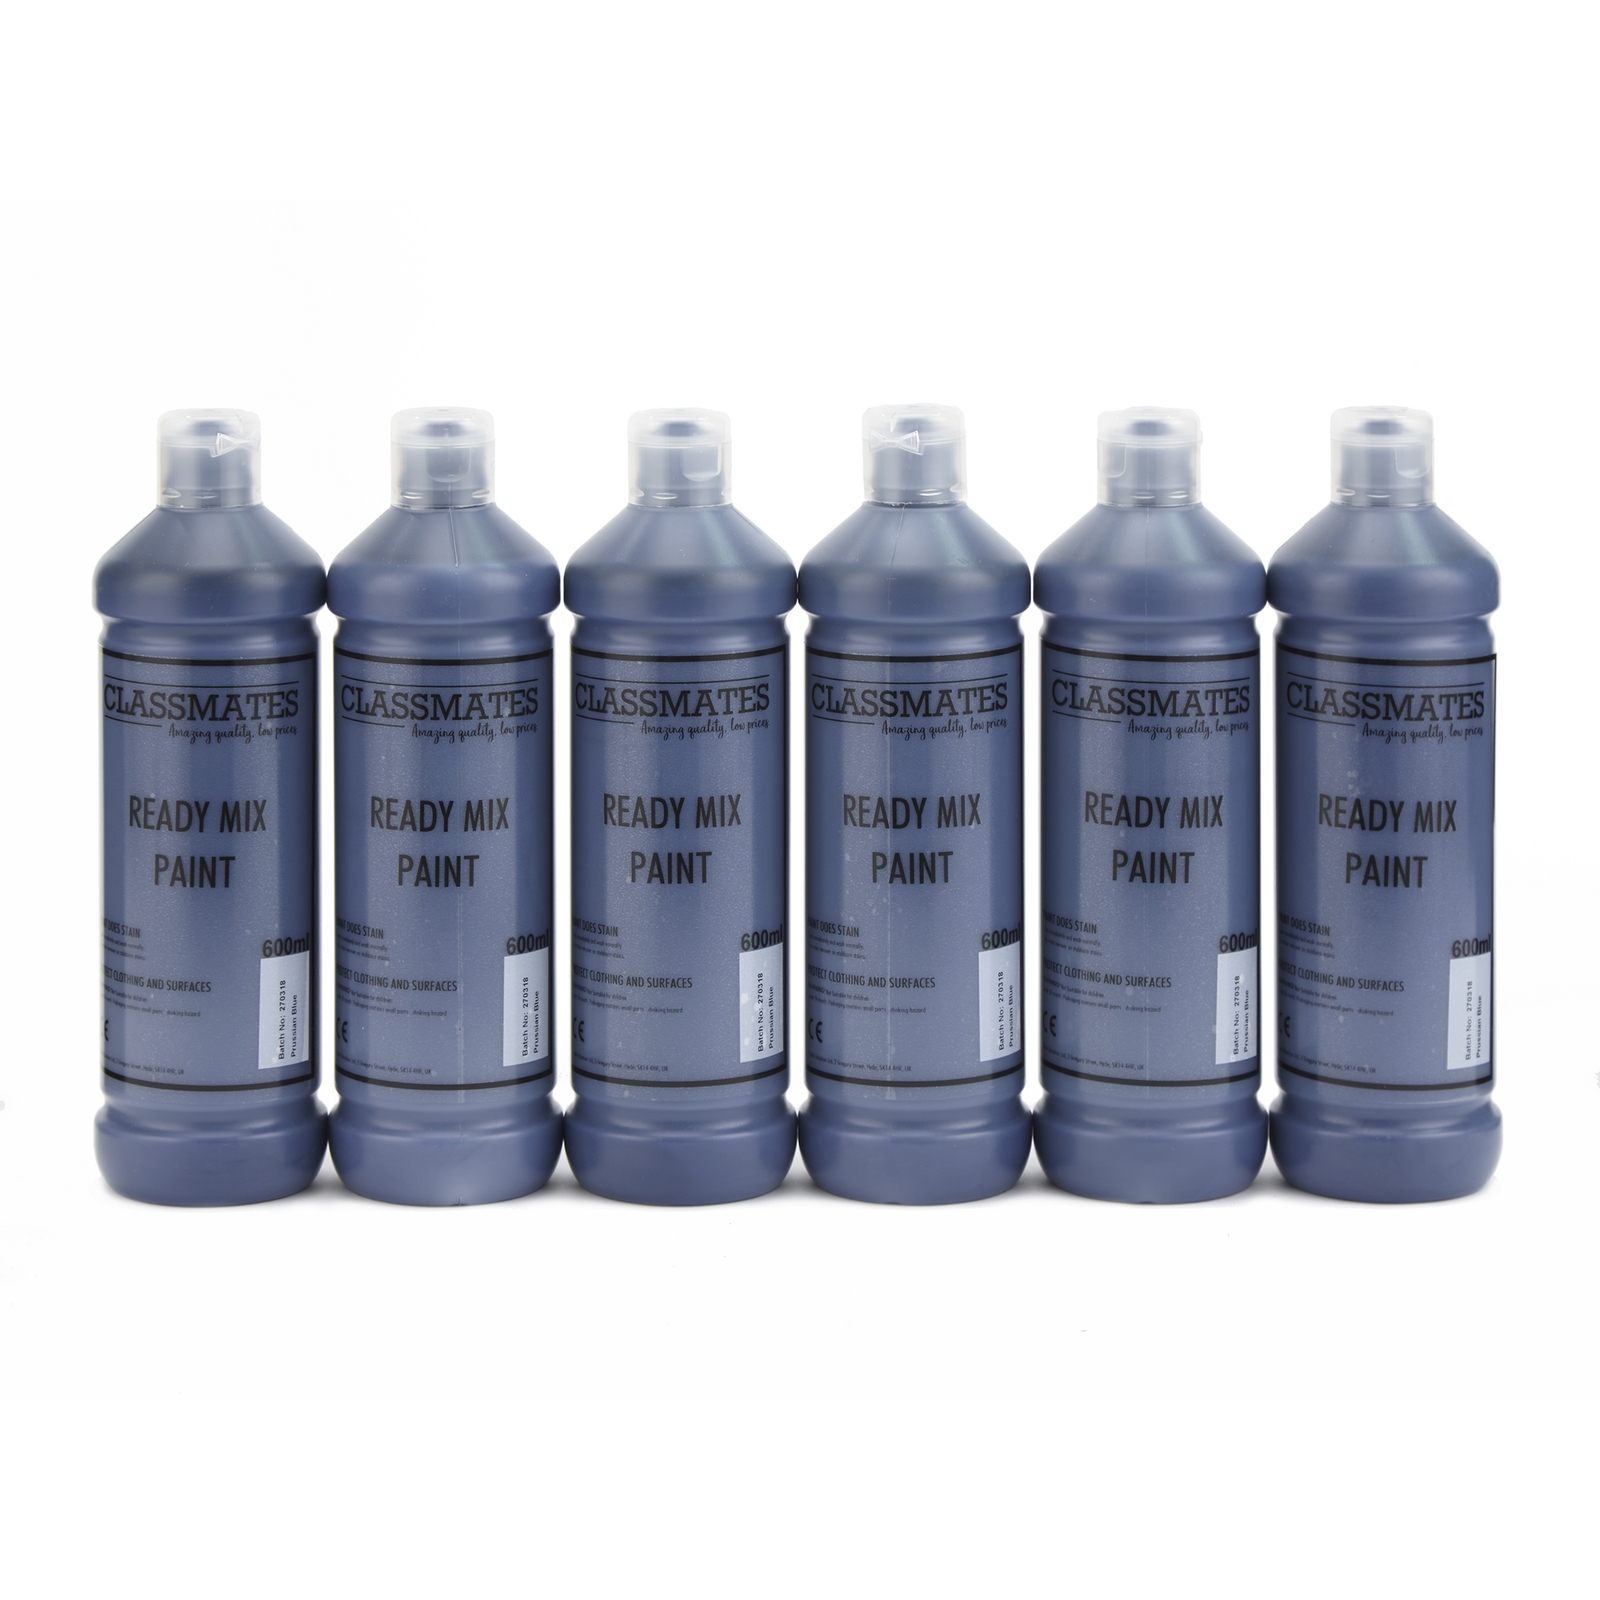 Classmates Prussian Blue Ready Mixed Paint - 600ml - Pack of 6